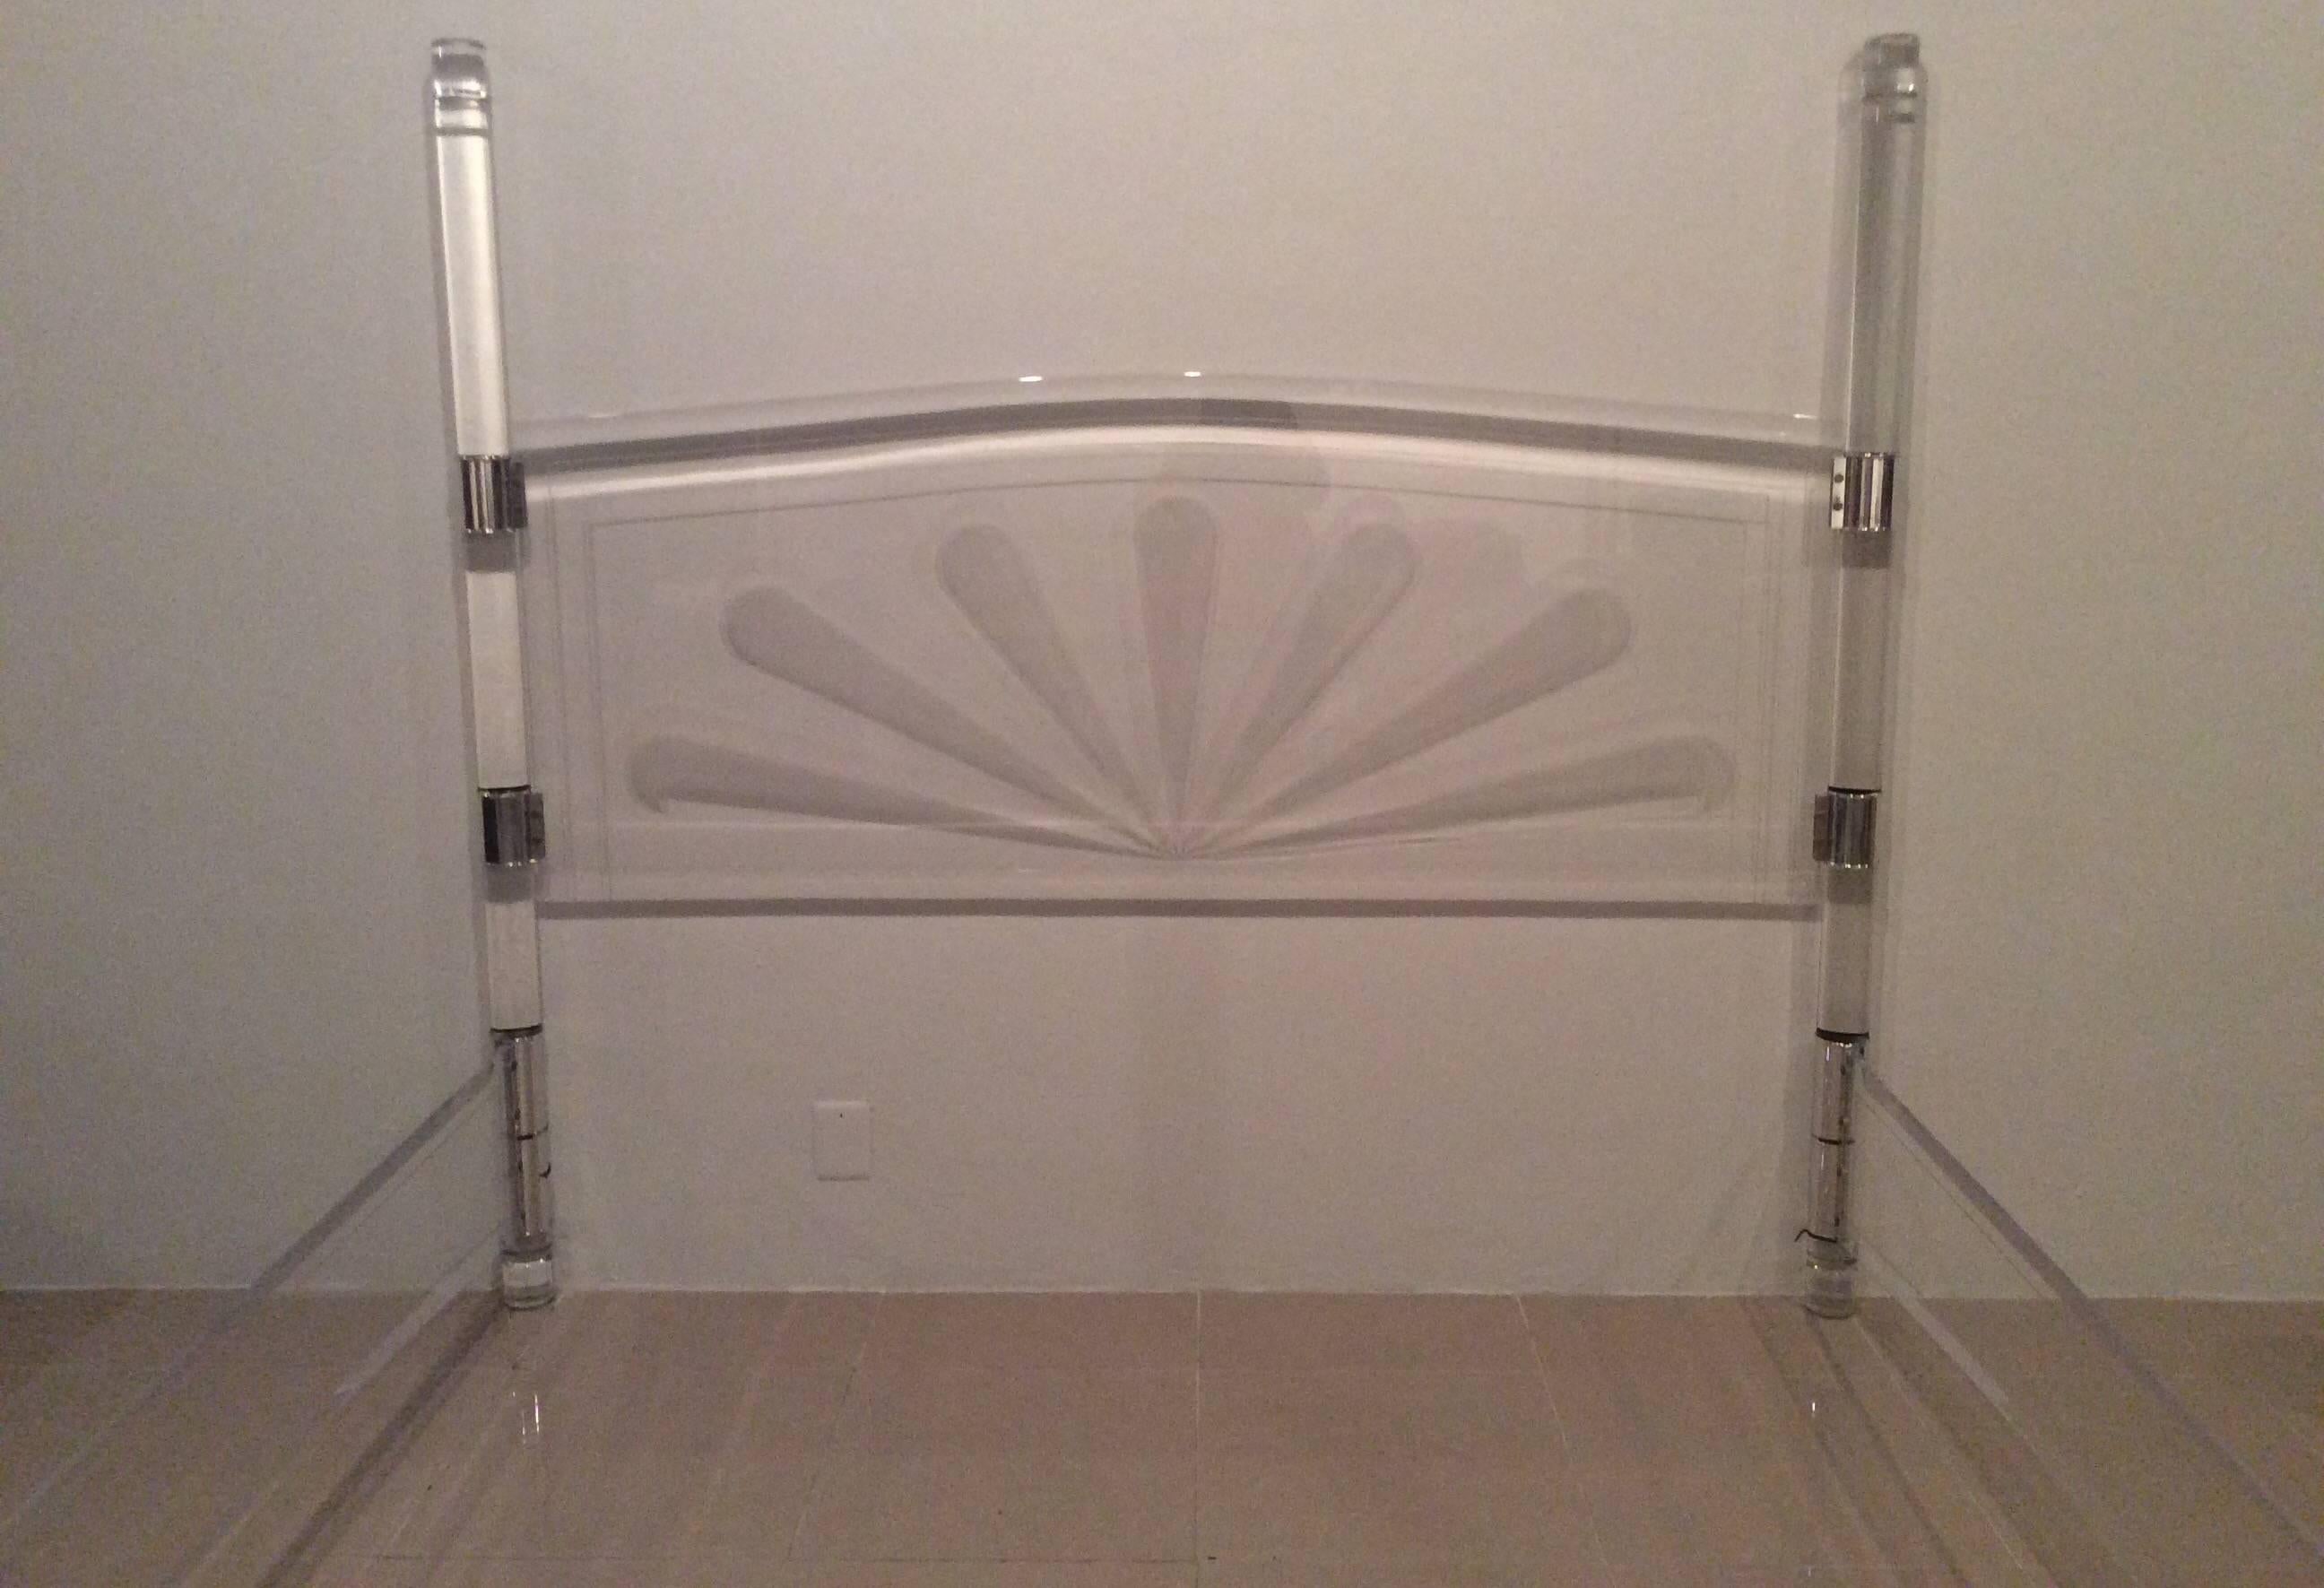 20th Century Lucite and Chrome Four Post Canopy Bed King-Size Vintage Headboard Mid-Century